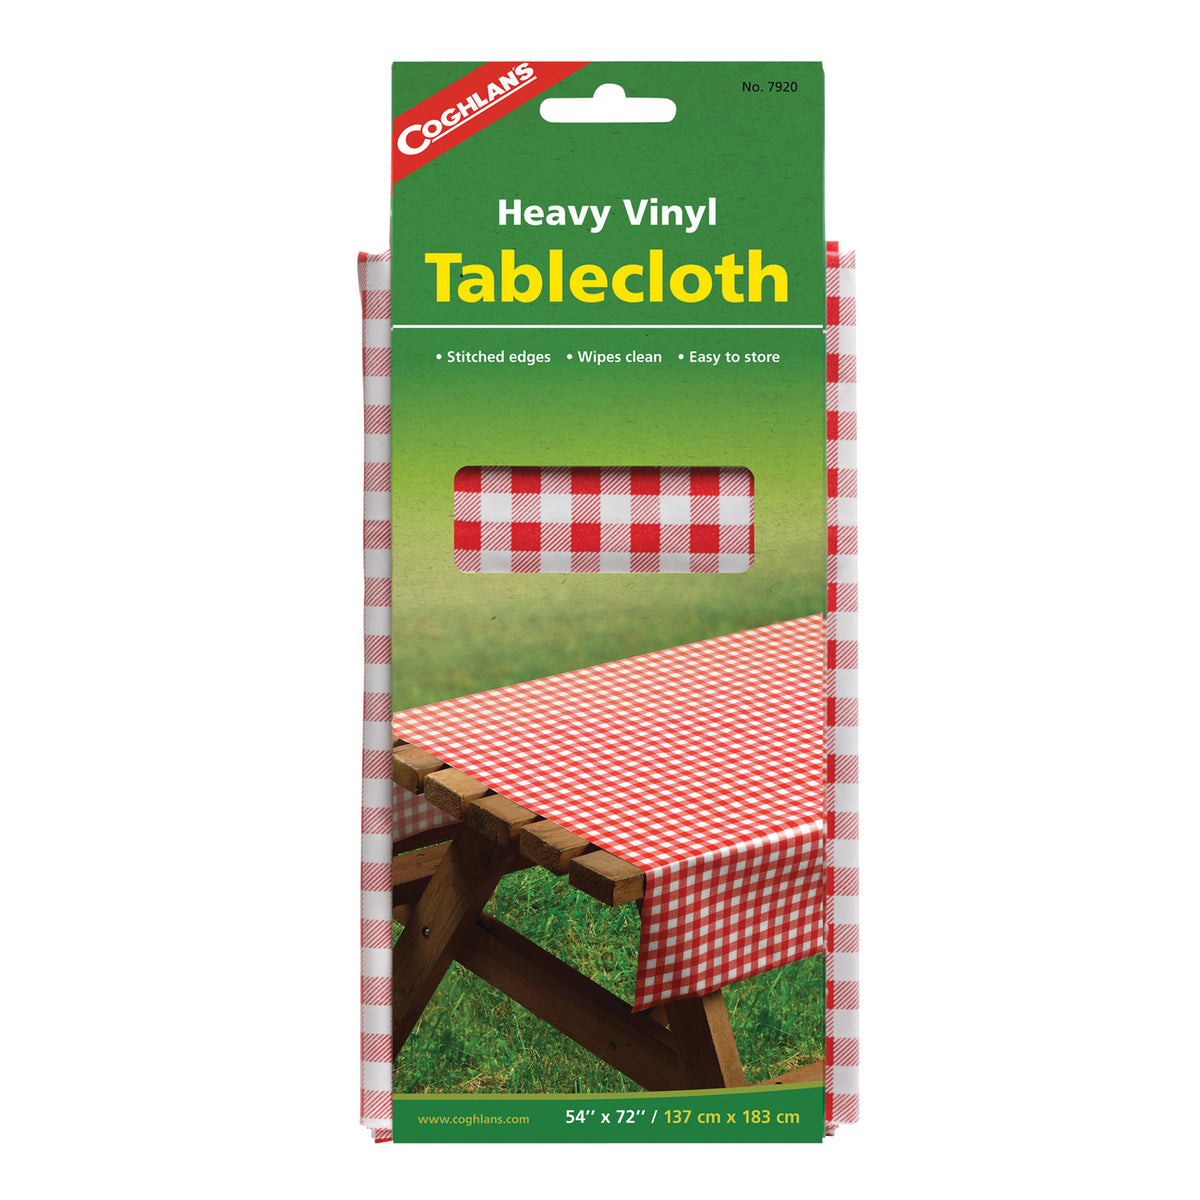 Coghlan's 7920 Tablecloth - 54" x 72", Red Gingham